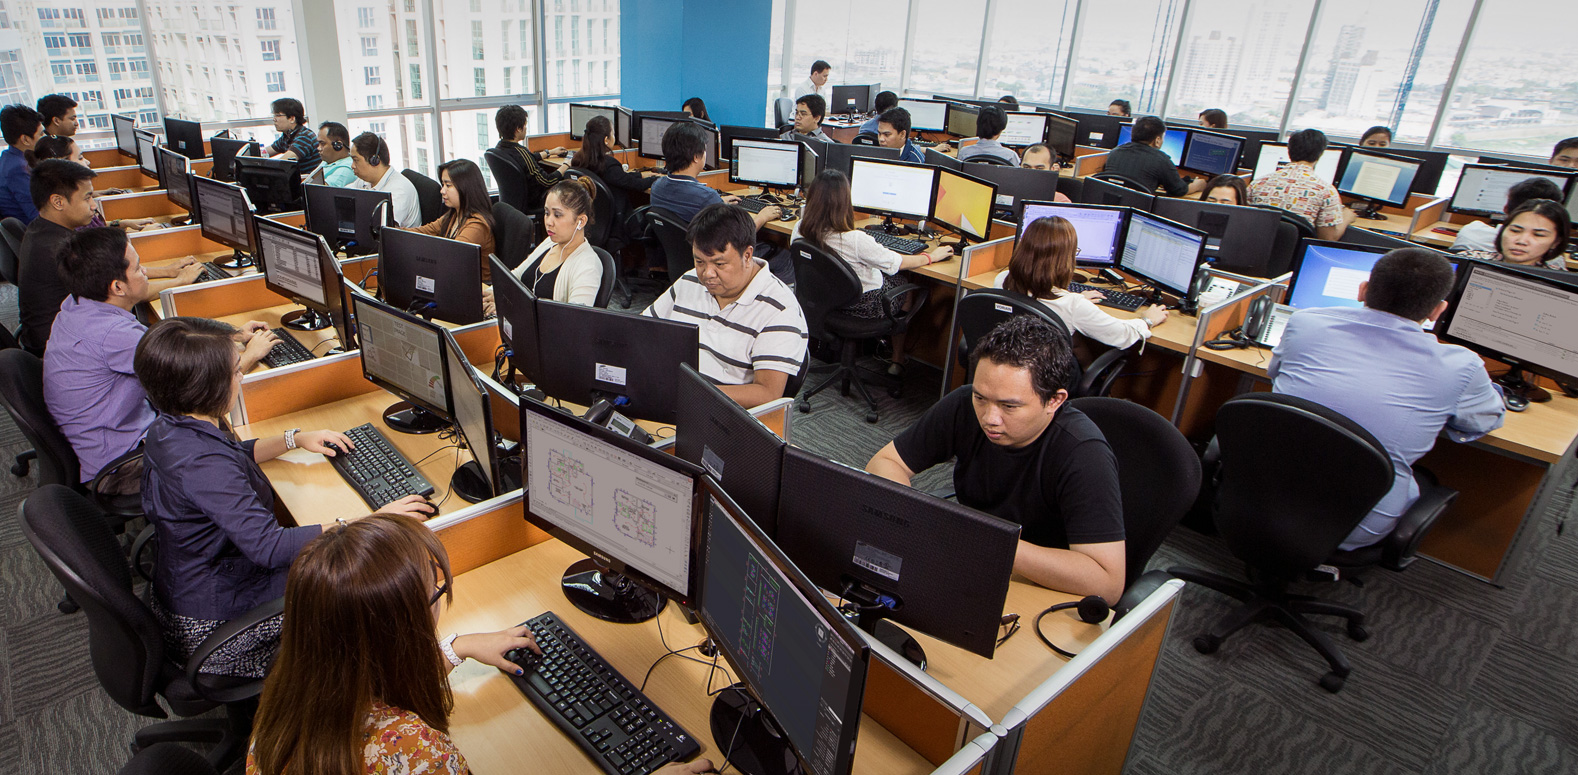 Outsourcing Blog - Business Process Outsourcing in the Philippines: BPO Services